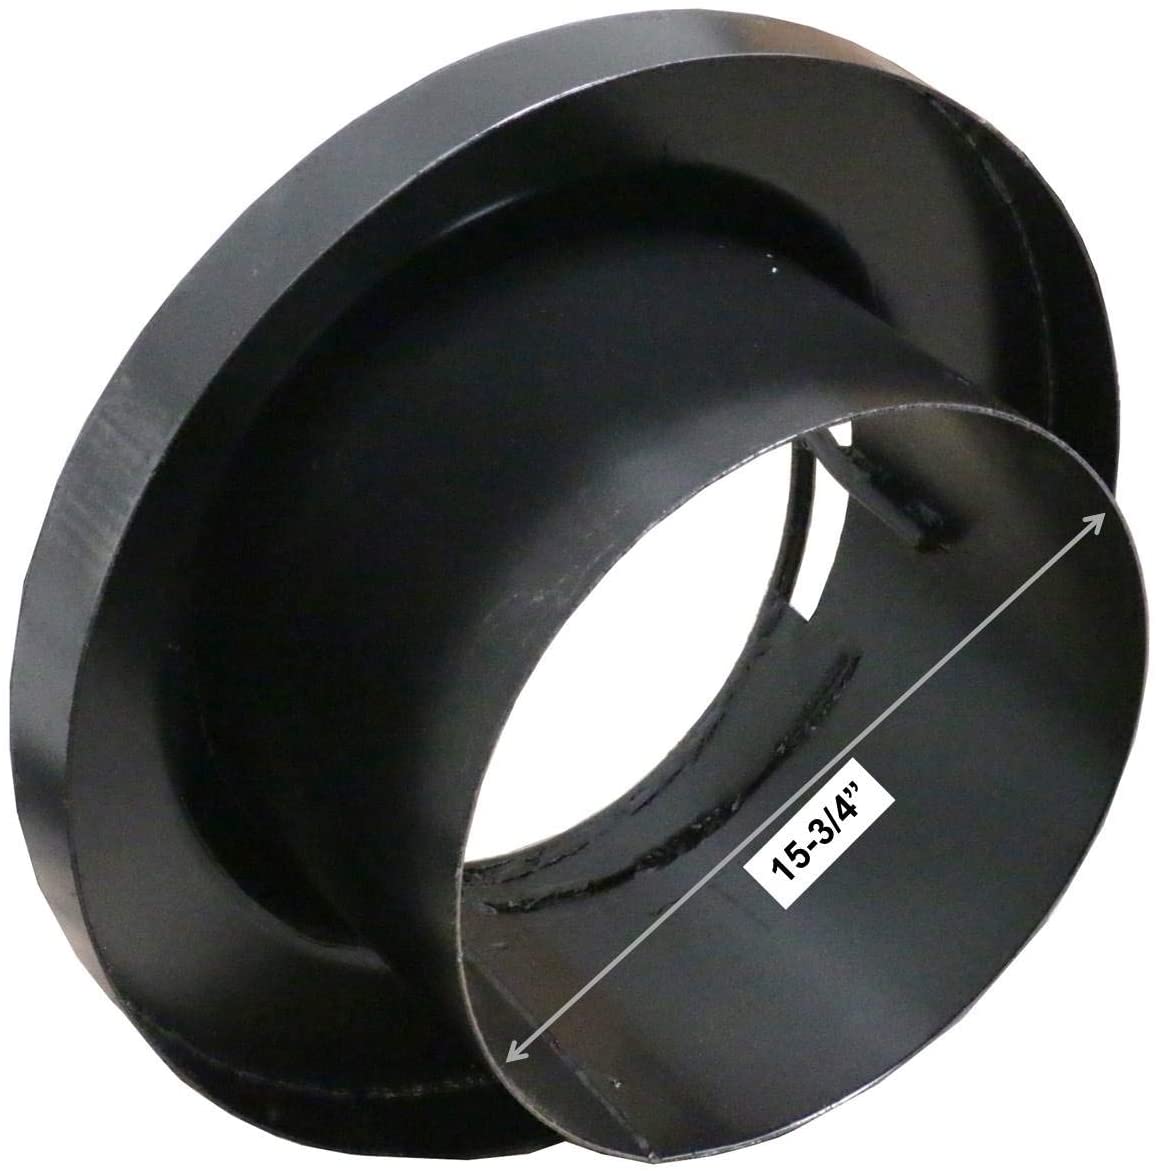 Leyso Chinese Wok Range Adapter/Reducer with Welded Ring - Convert The Large Wok Well to Smaller Size (20" to 16")